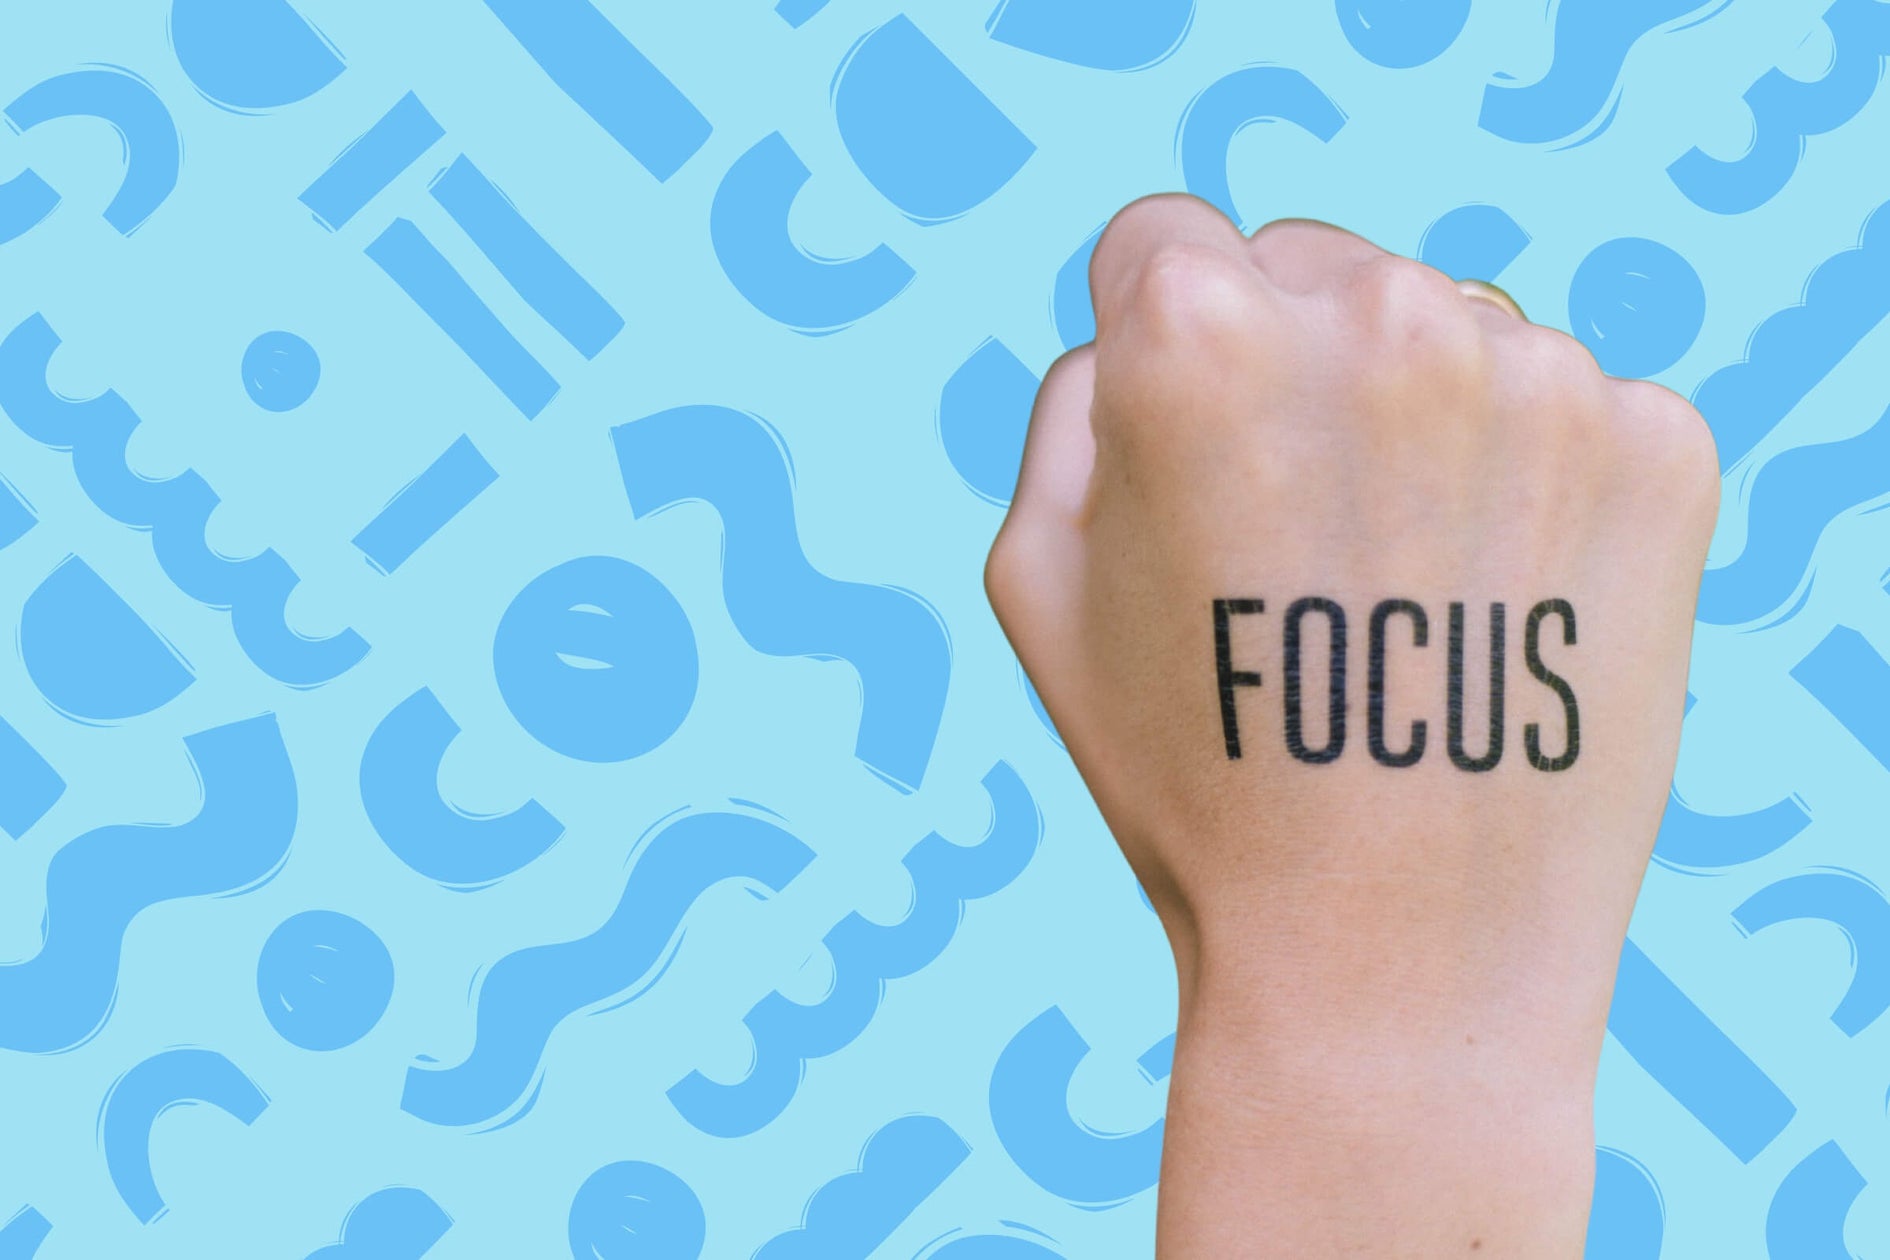 Why Can’t I Focus? 5 Reasons and Solutions